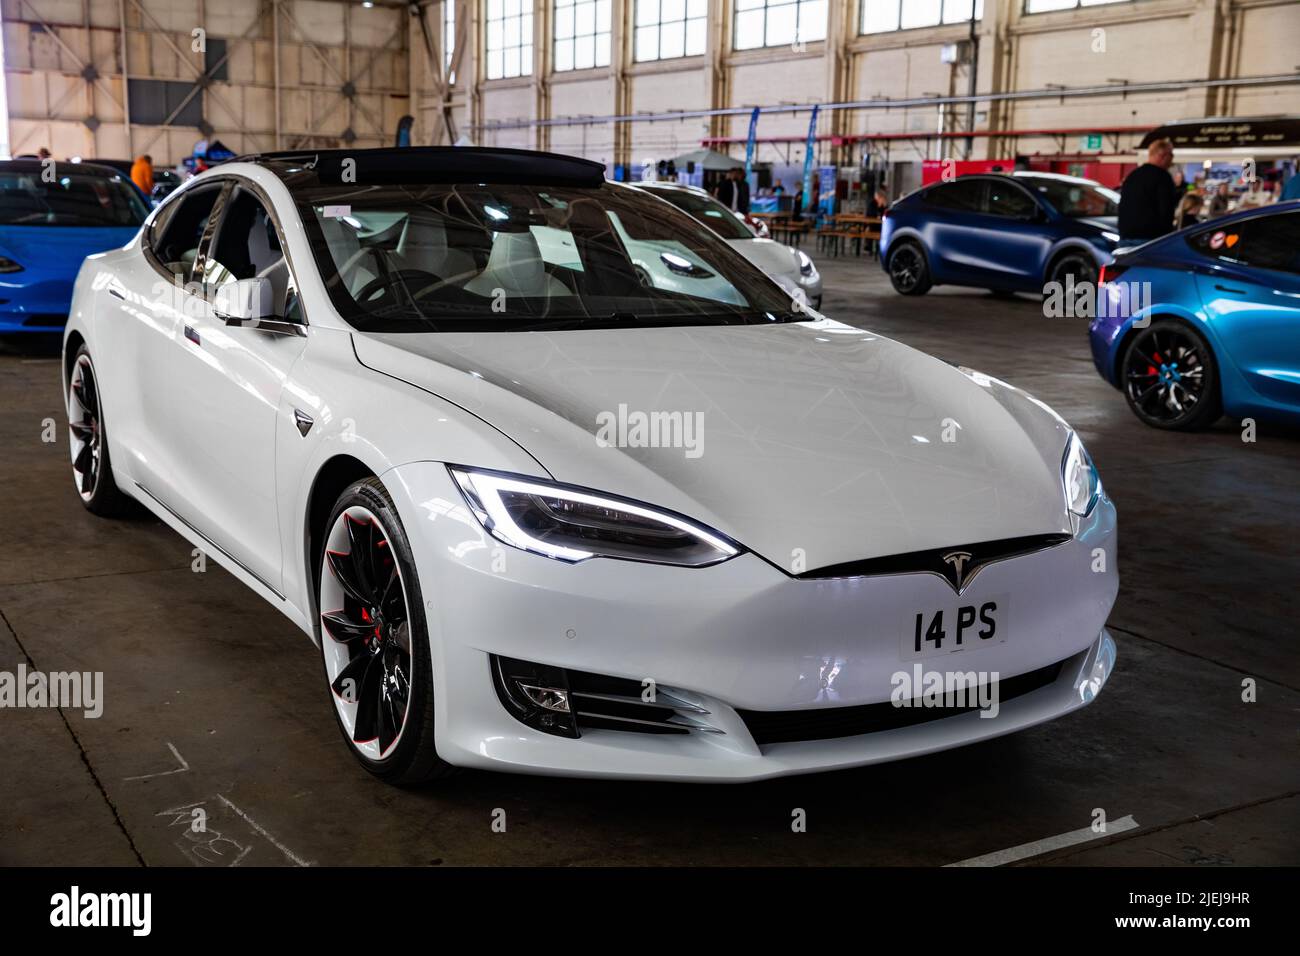 Tesla Owners Fun Day at Bicester Aerodrome, Bicester on a sunny June Day Stock Photo